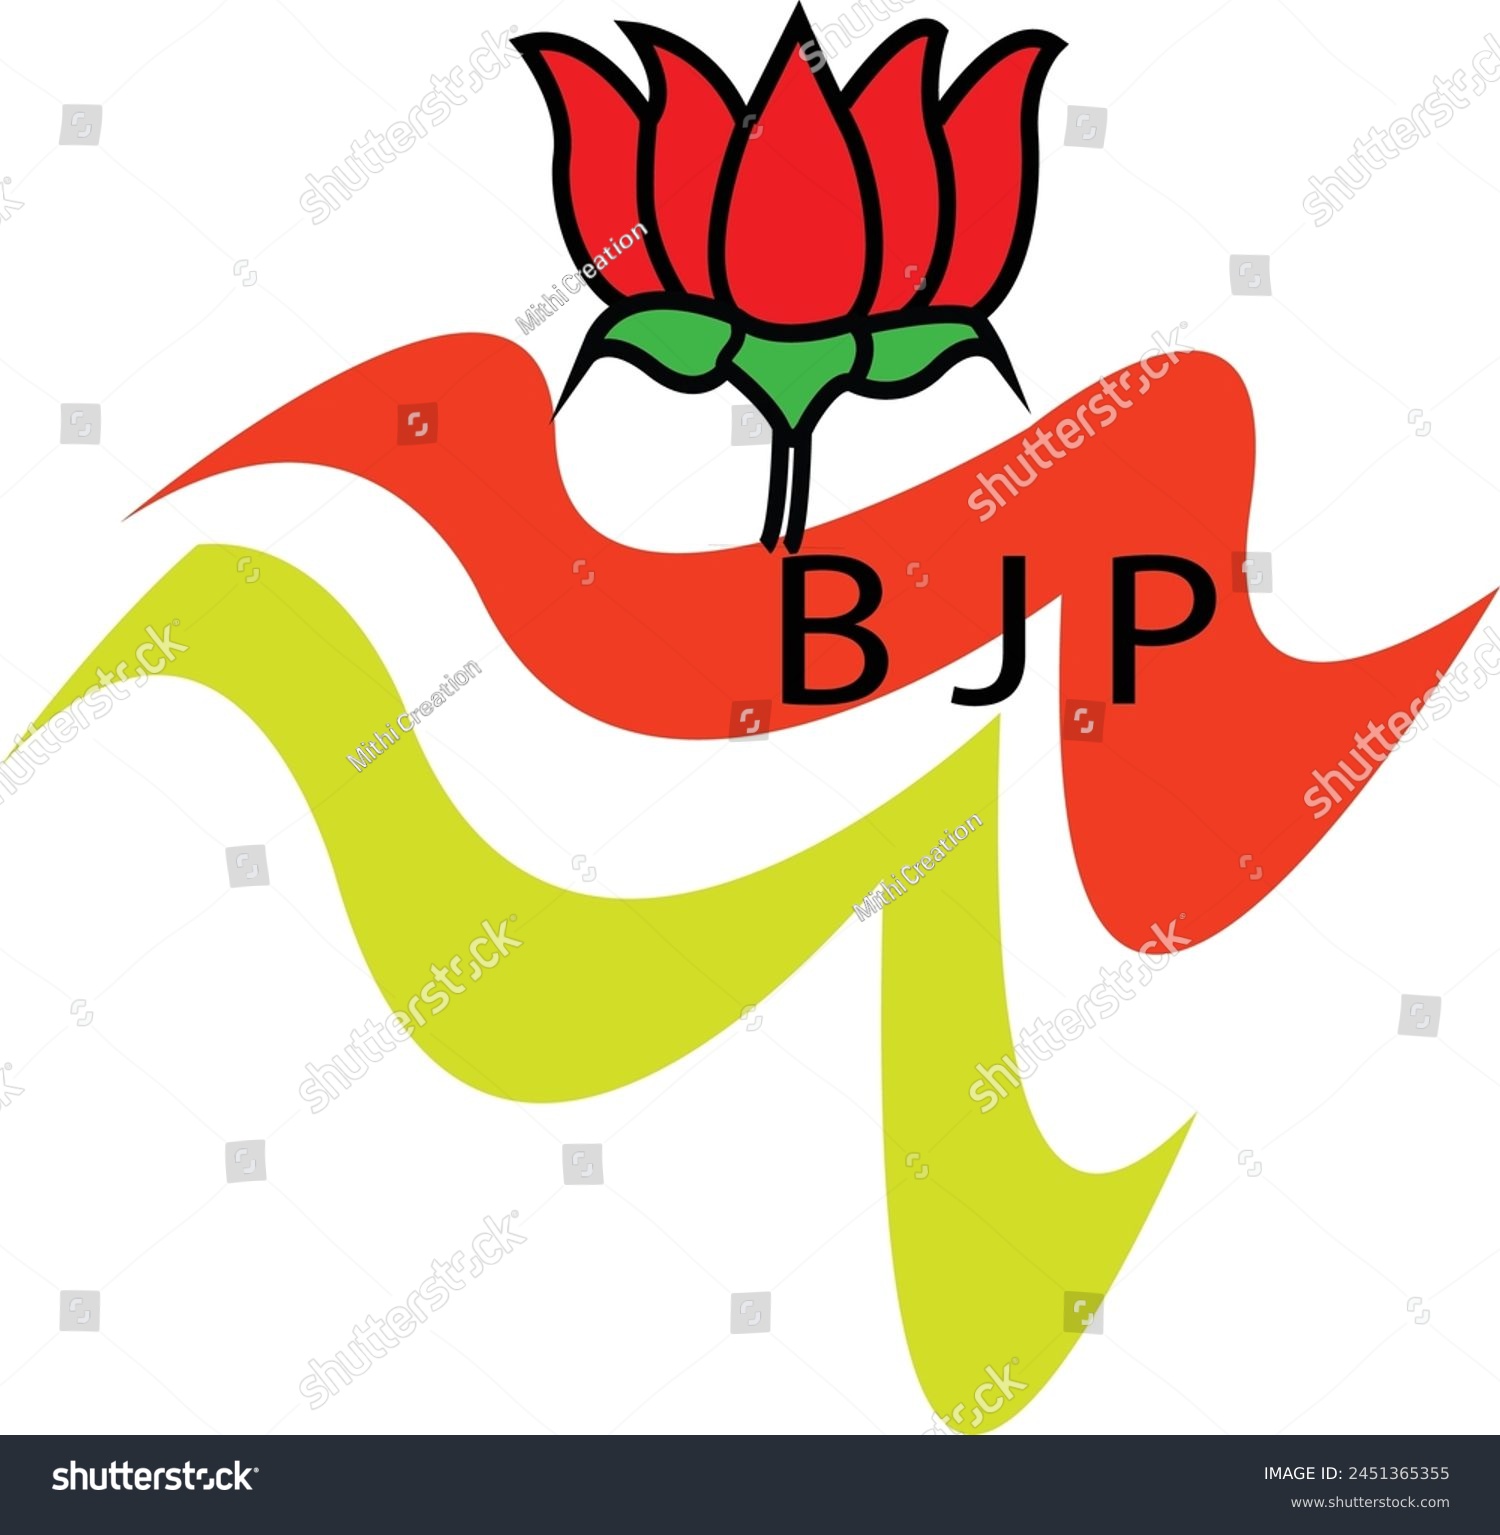 SVG of BJP Lotus icon vector stock photo svg